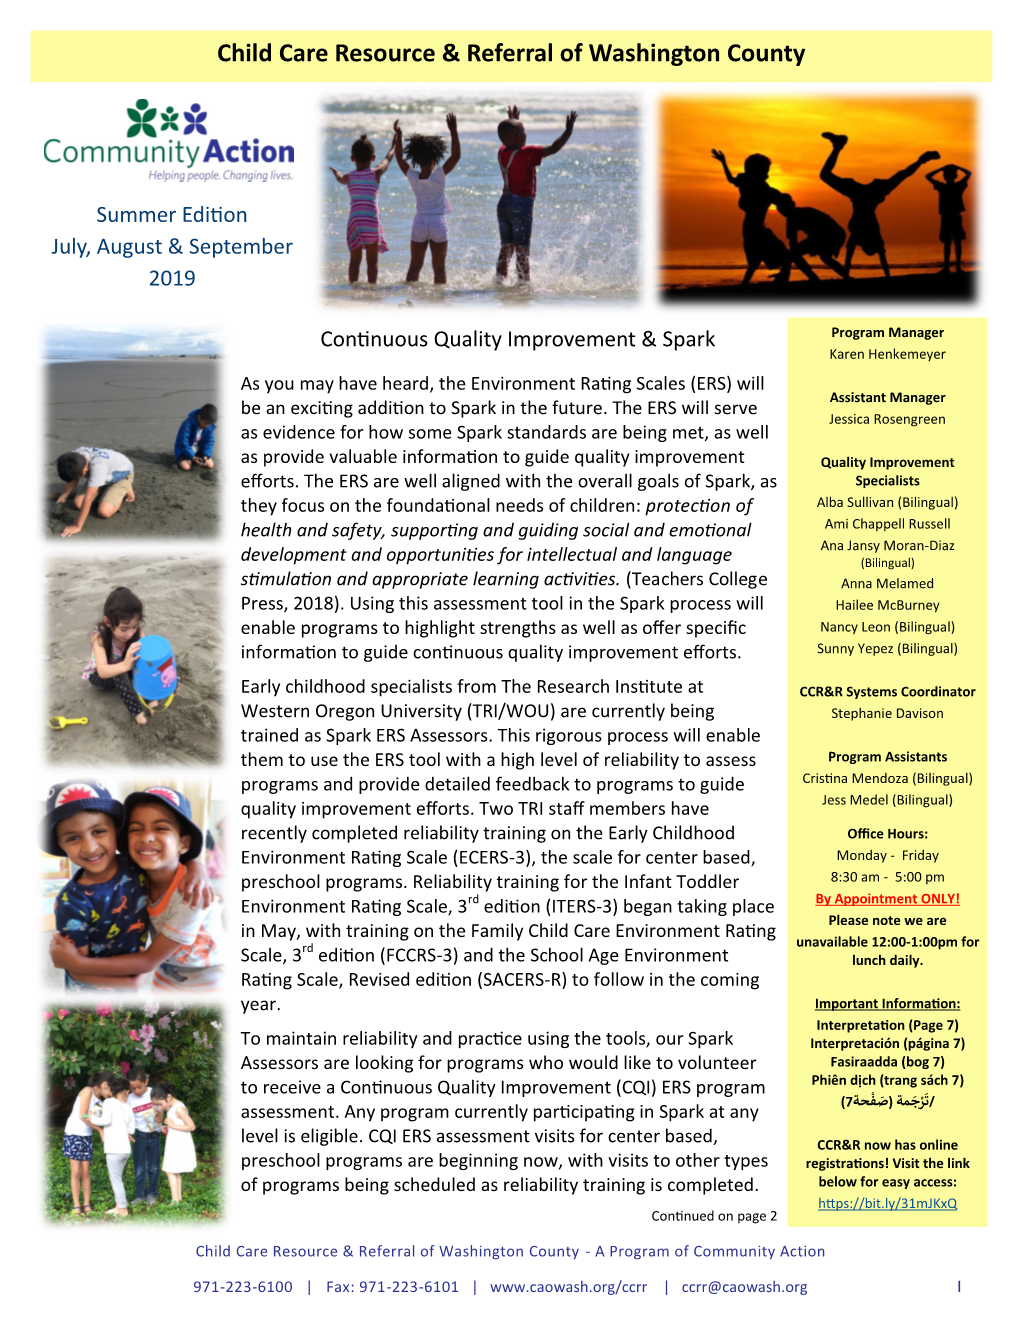 Child Care Resource & Referral of Washington County